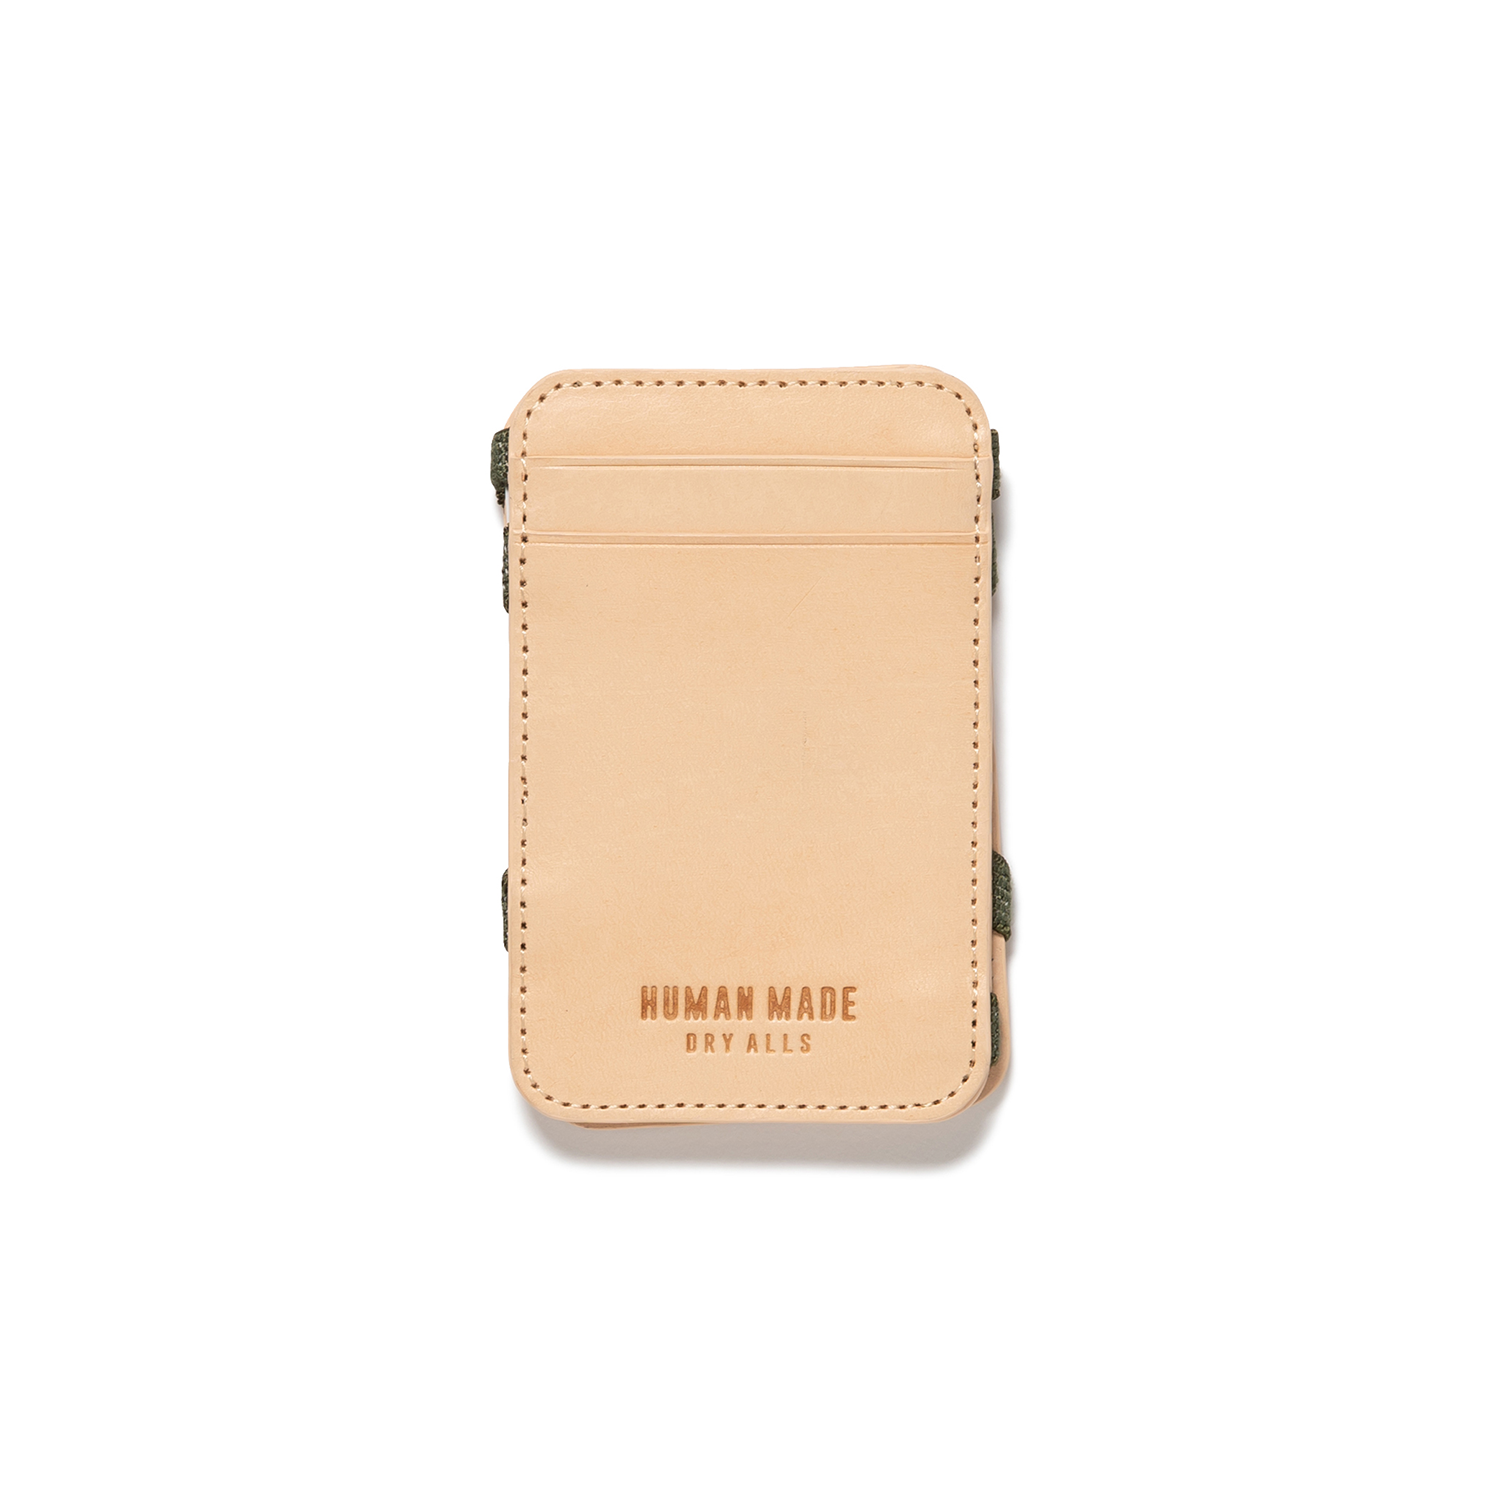 Human made LEATHER CARD CASE - 名刺入れ